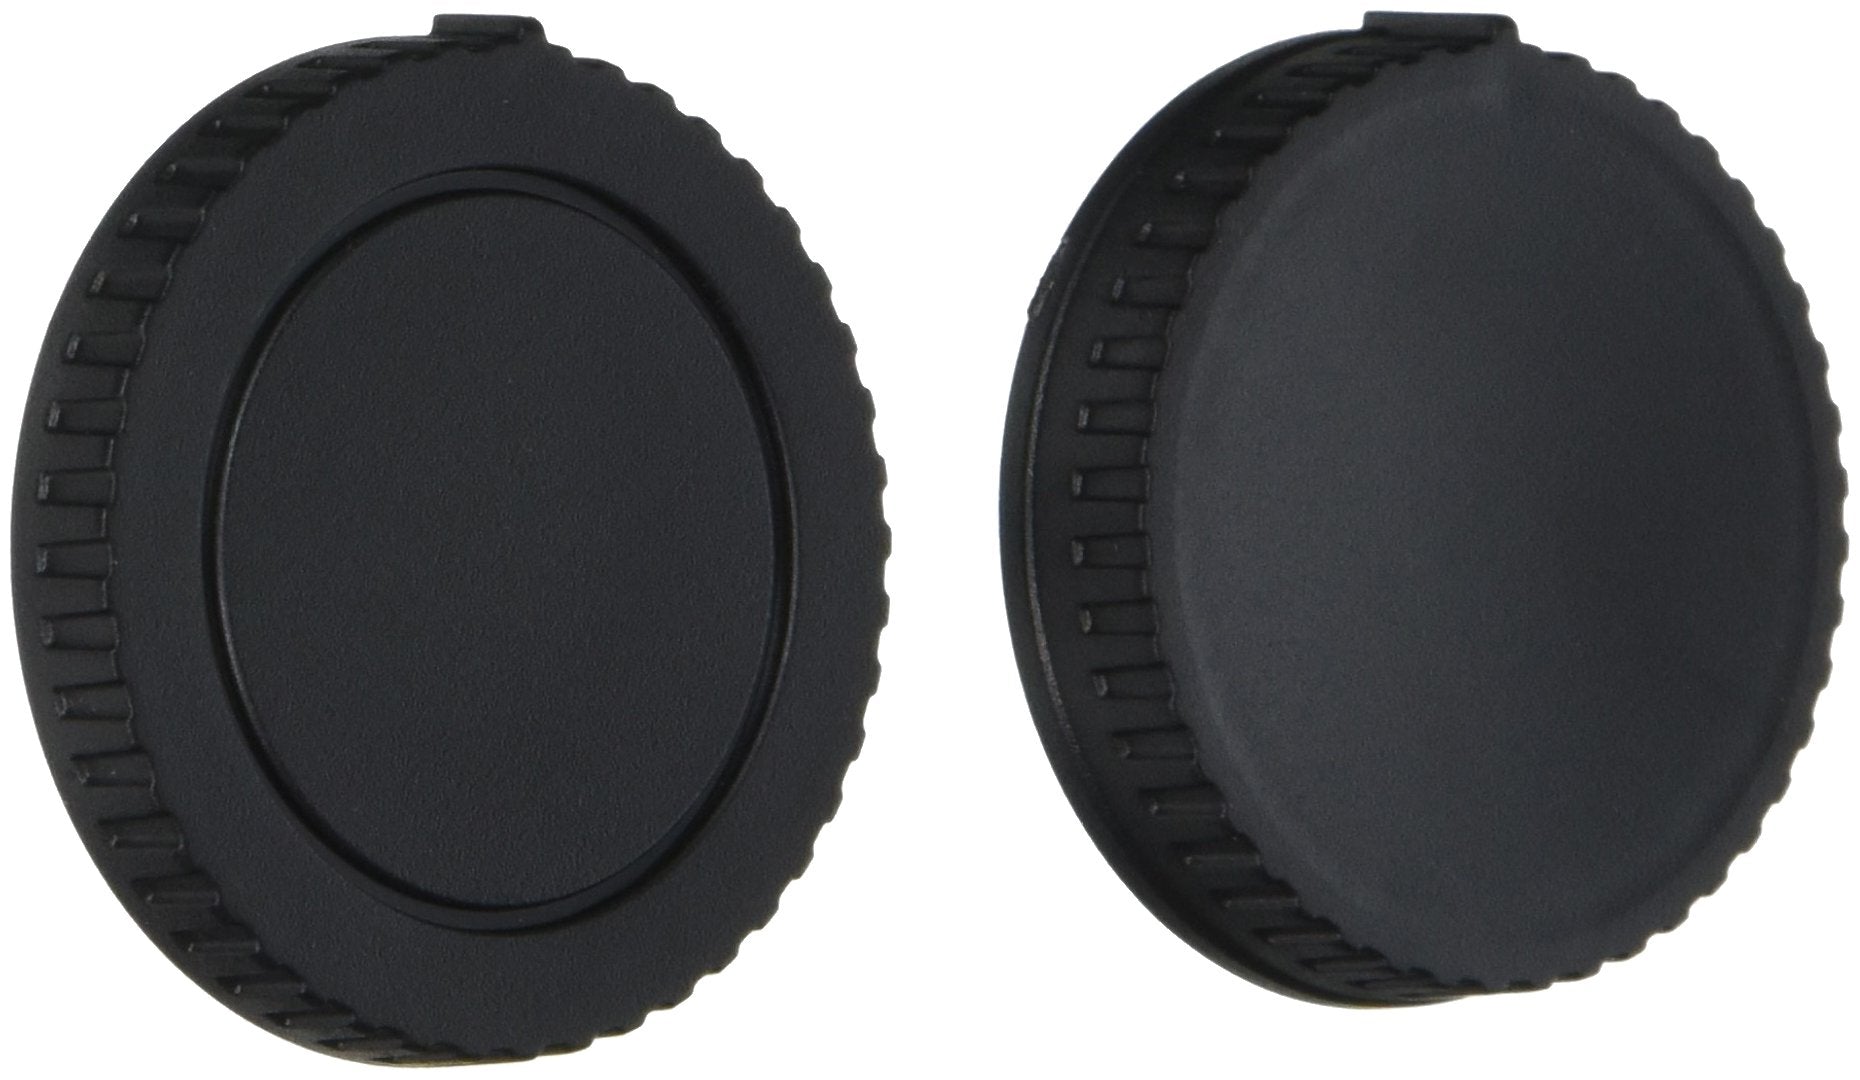 Movo Photo Lens Mount Cap and Body Cap for DSLR Camera  - Like New